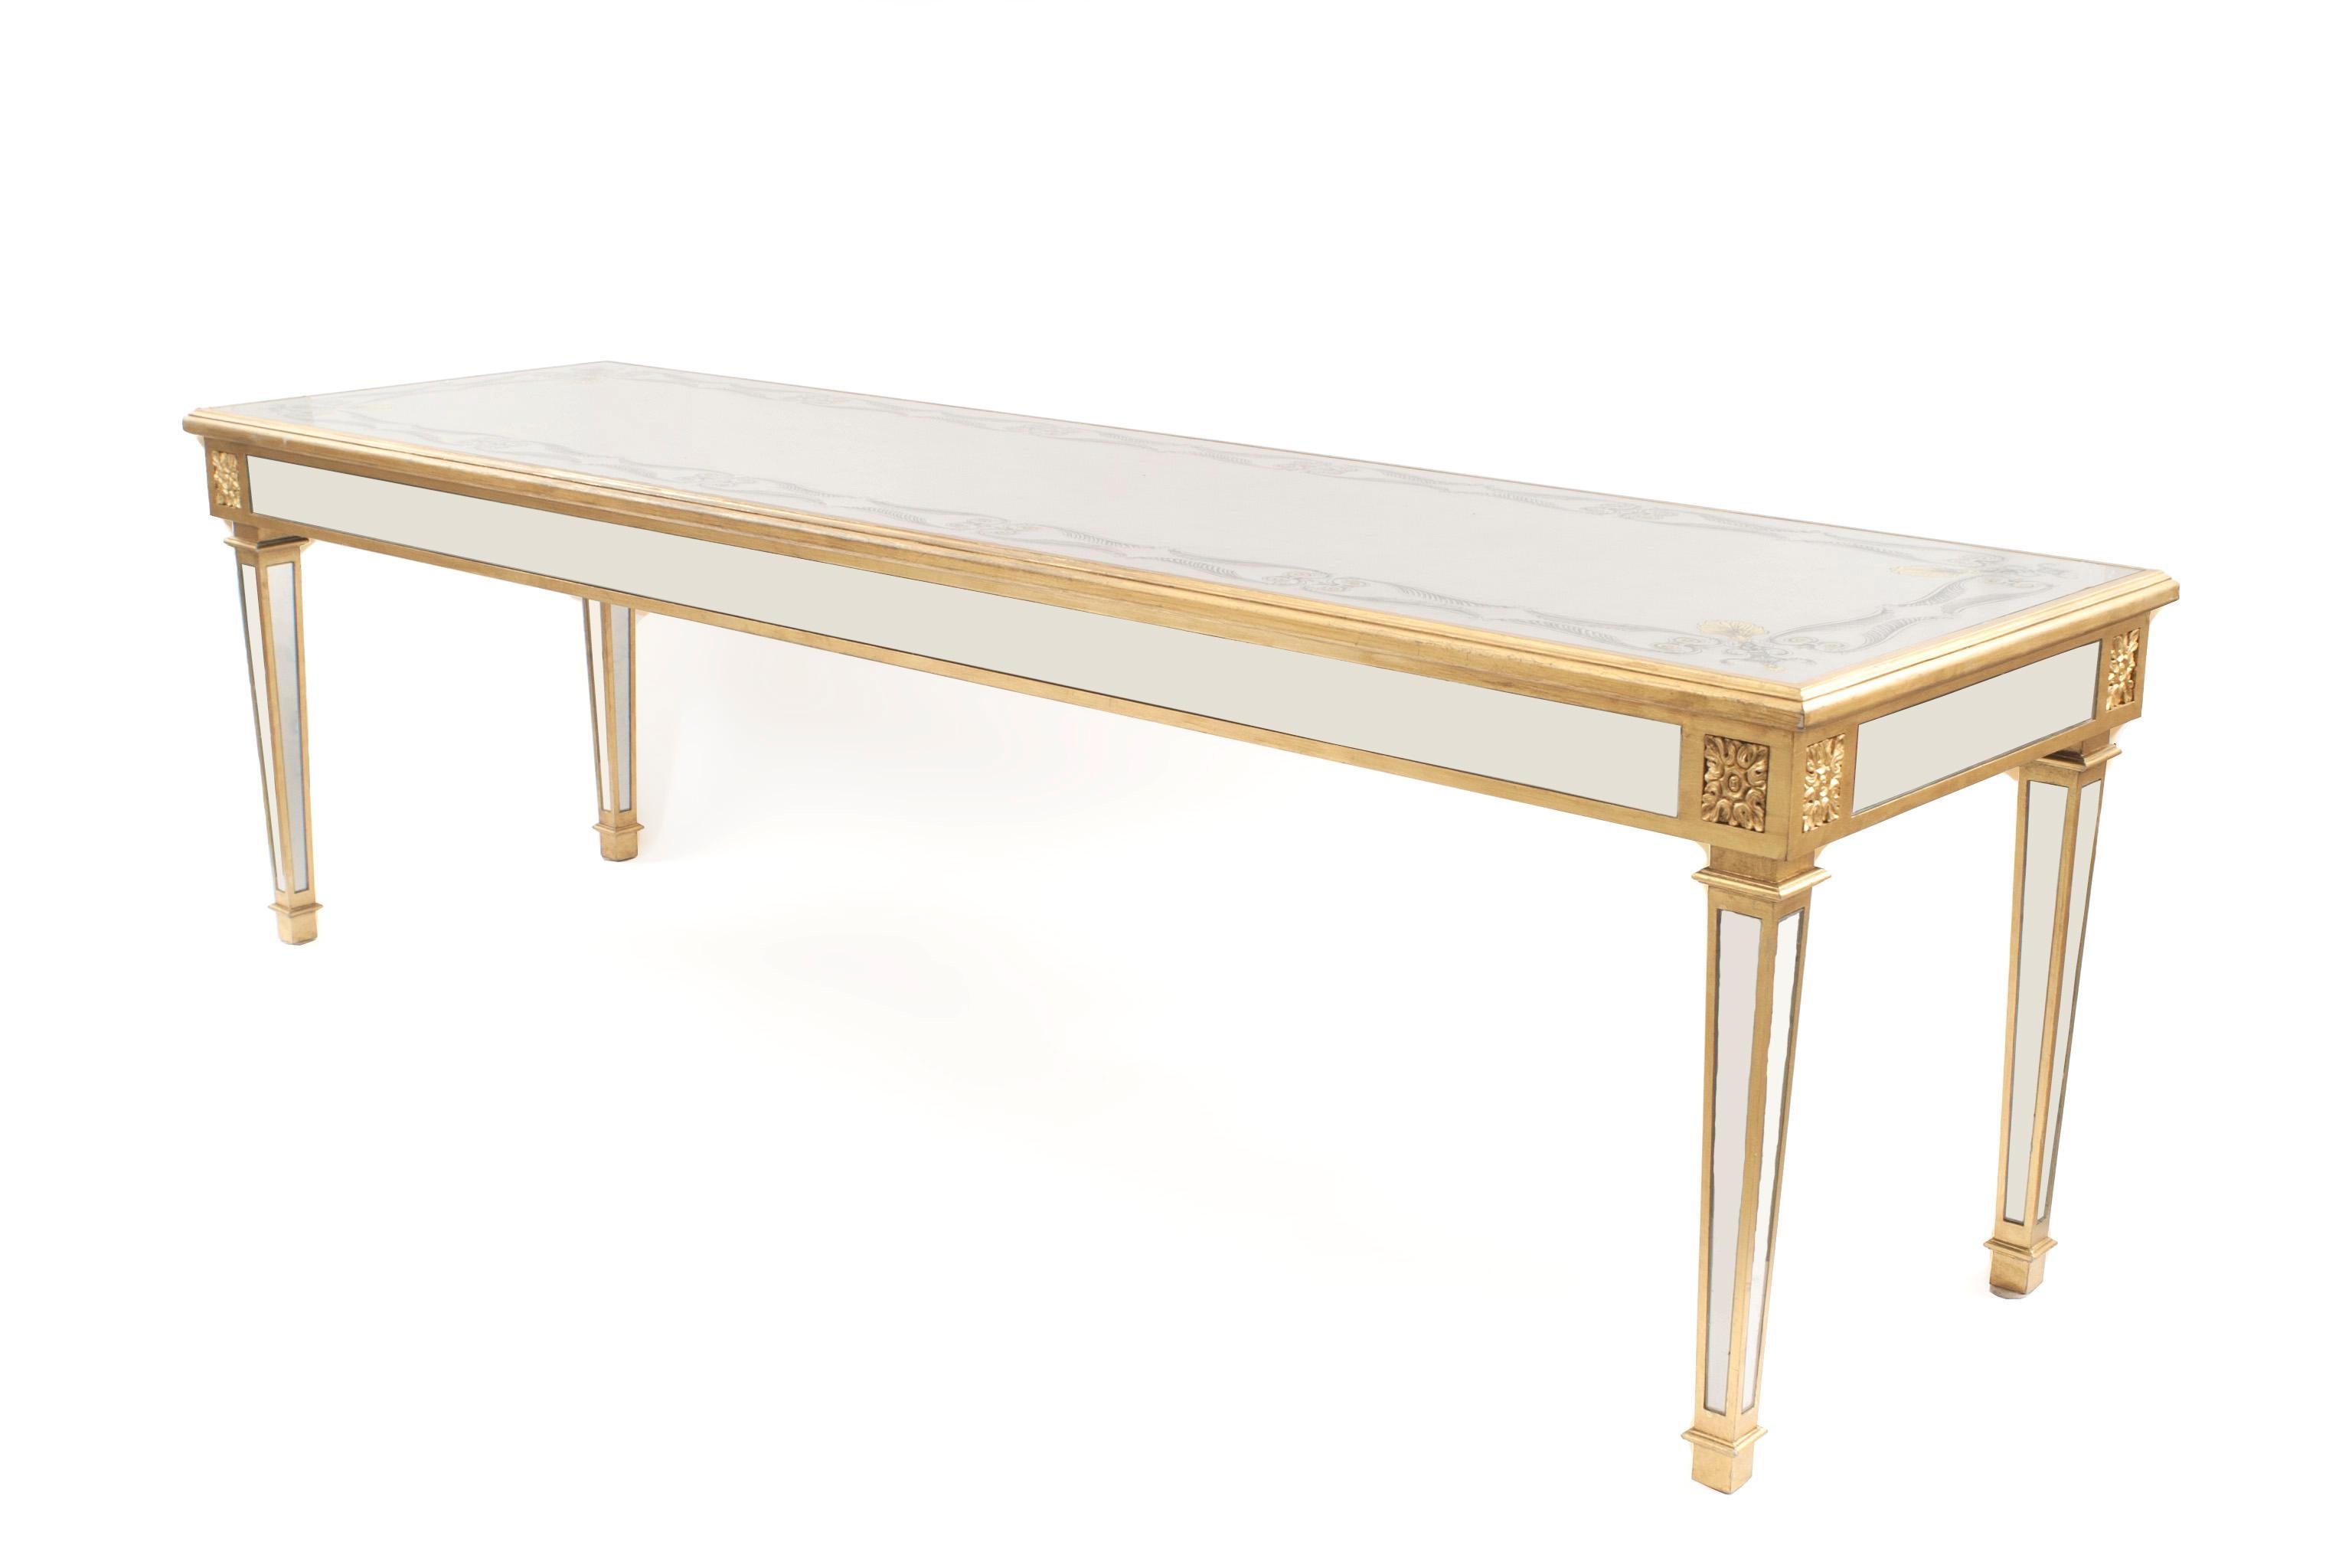 American Mid-Century console table having a silver leaf and eglomise decorated top inset in gold painted wood with a mirrored apron supported on square tapered mirrored legs
